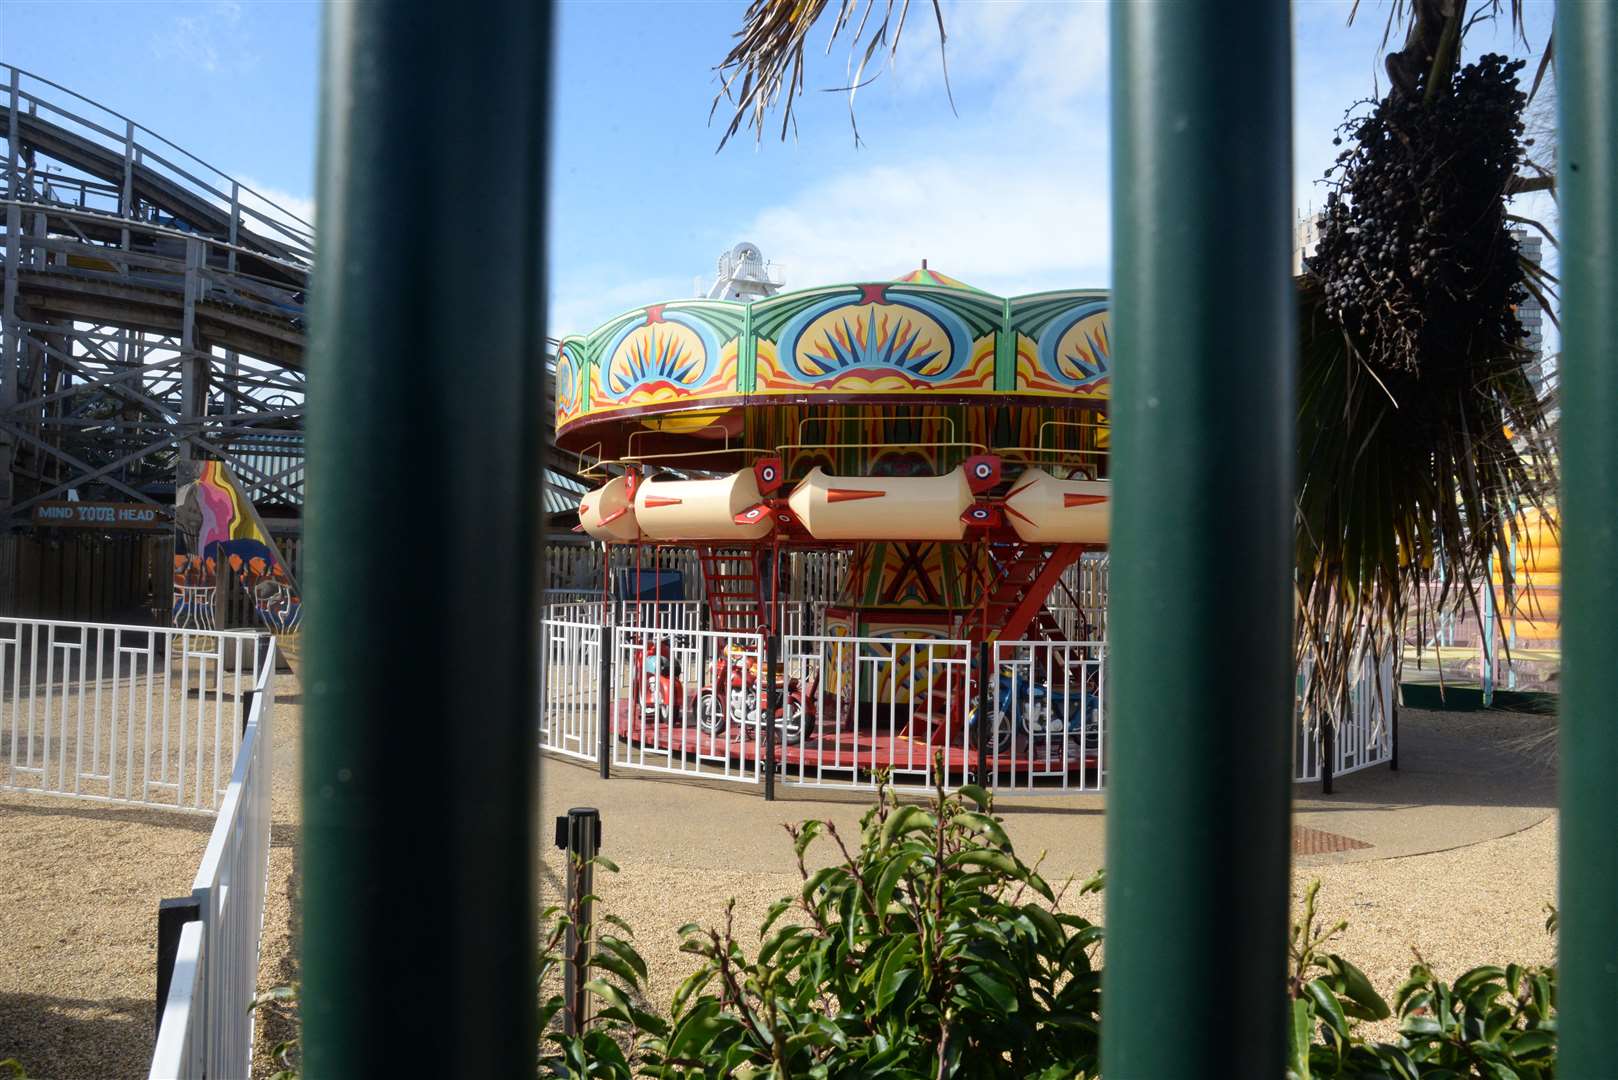 A merry-go-round ride at Dreamland in 2020. Picture: Chris Davey